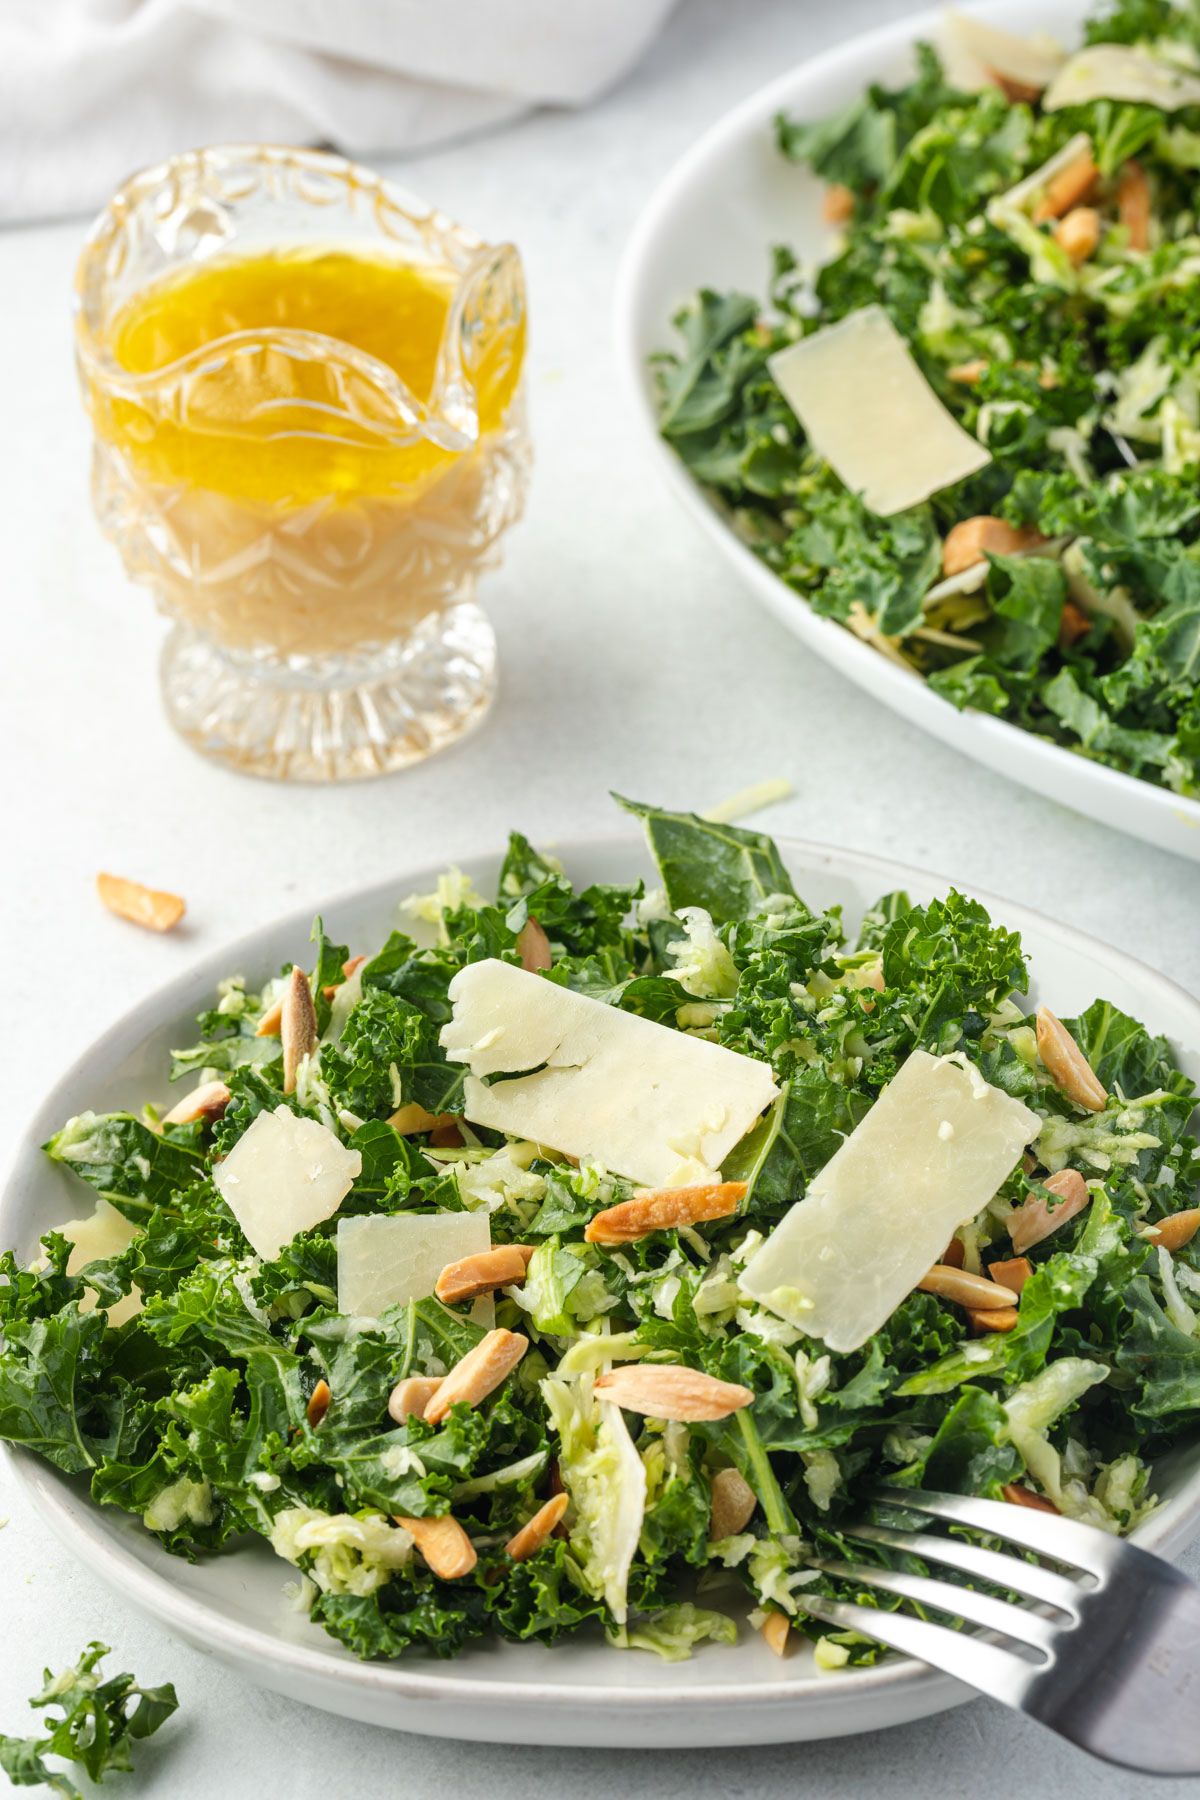 Kale salad with parmesan & almonds on a plate, with a fork resting on side, and crystal pitcher of dressing in back.